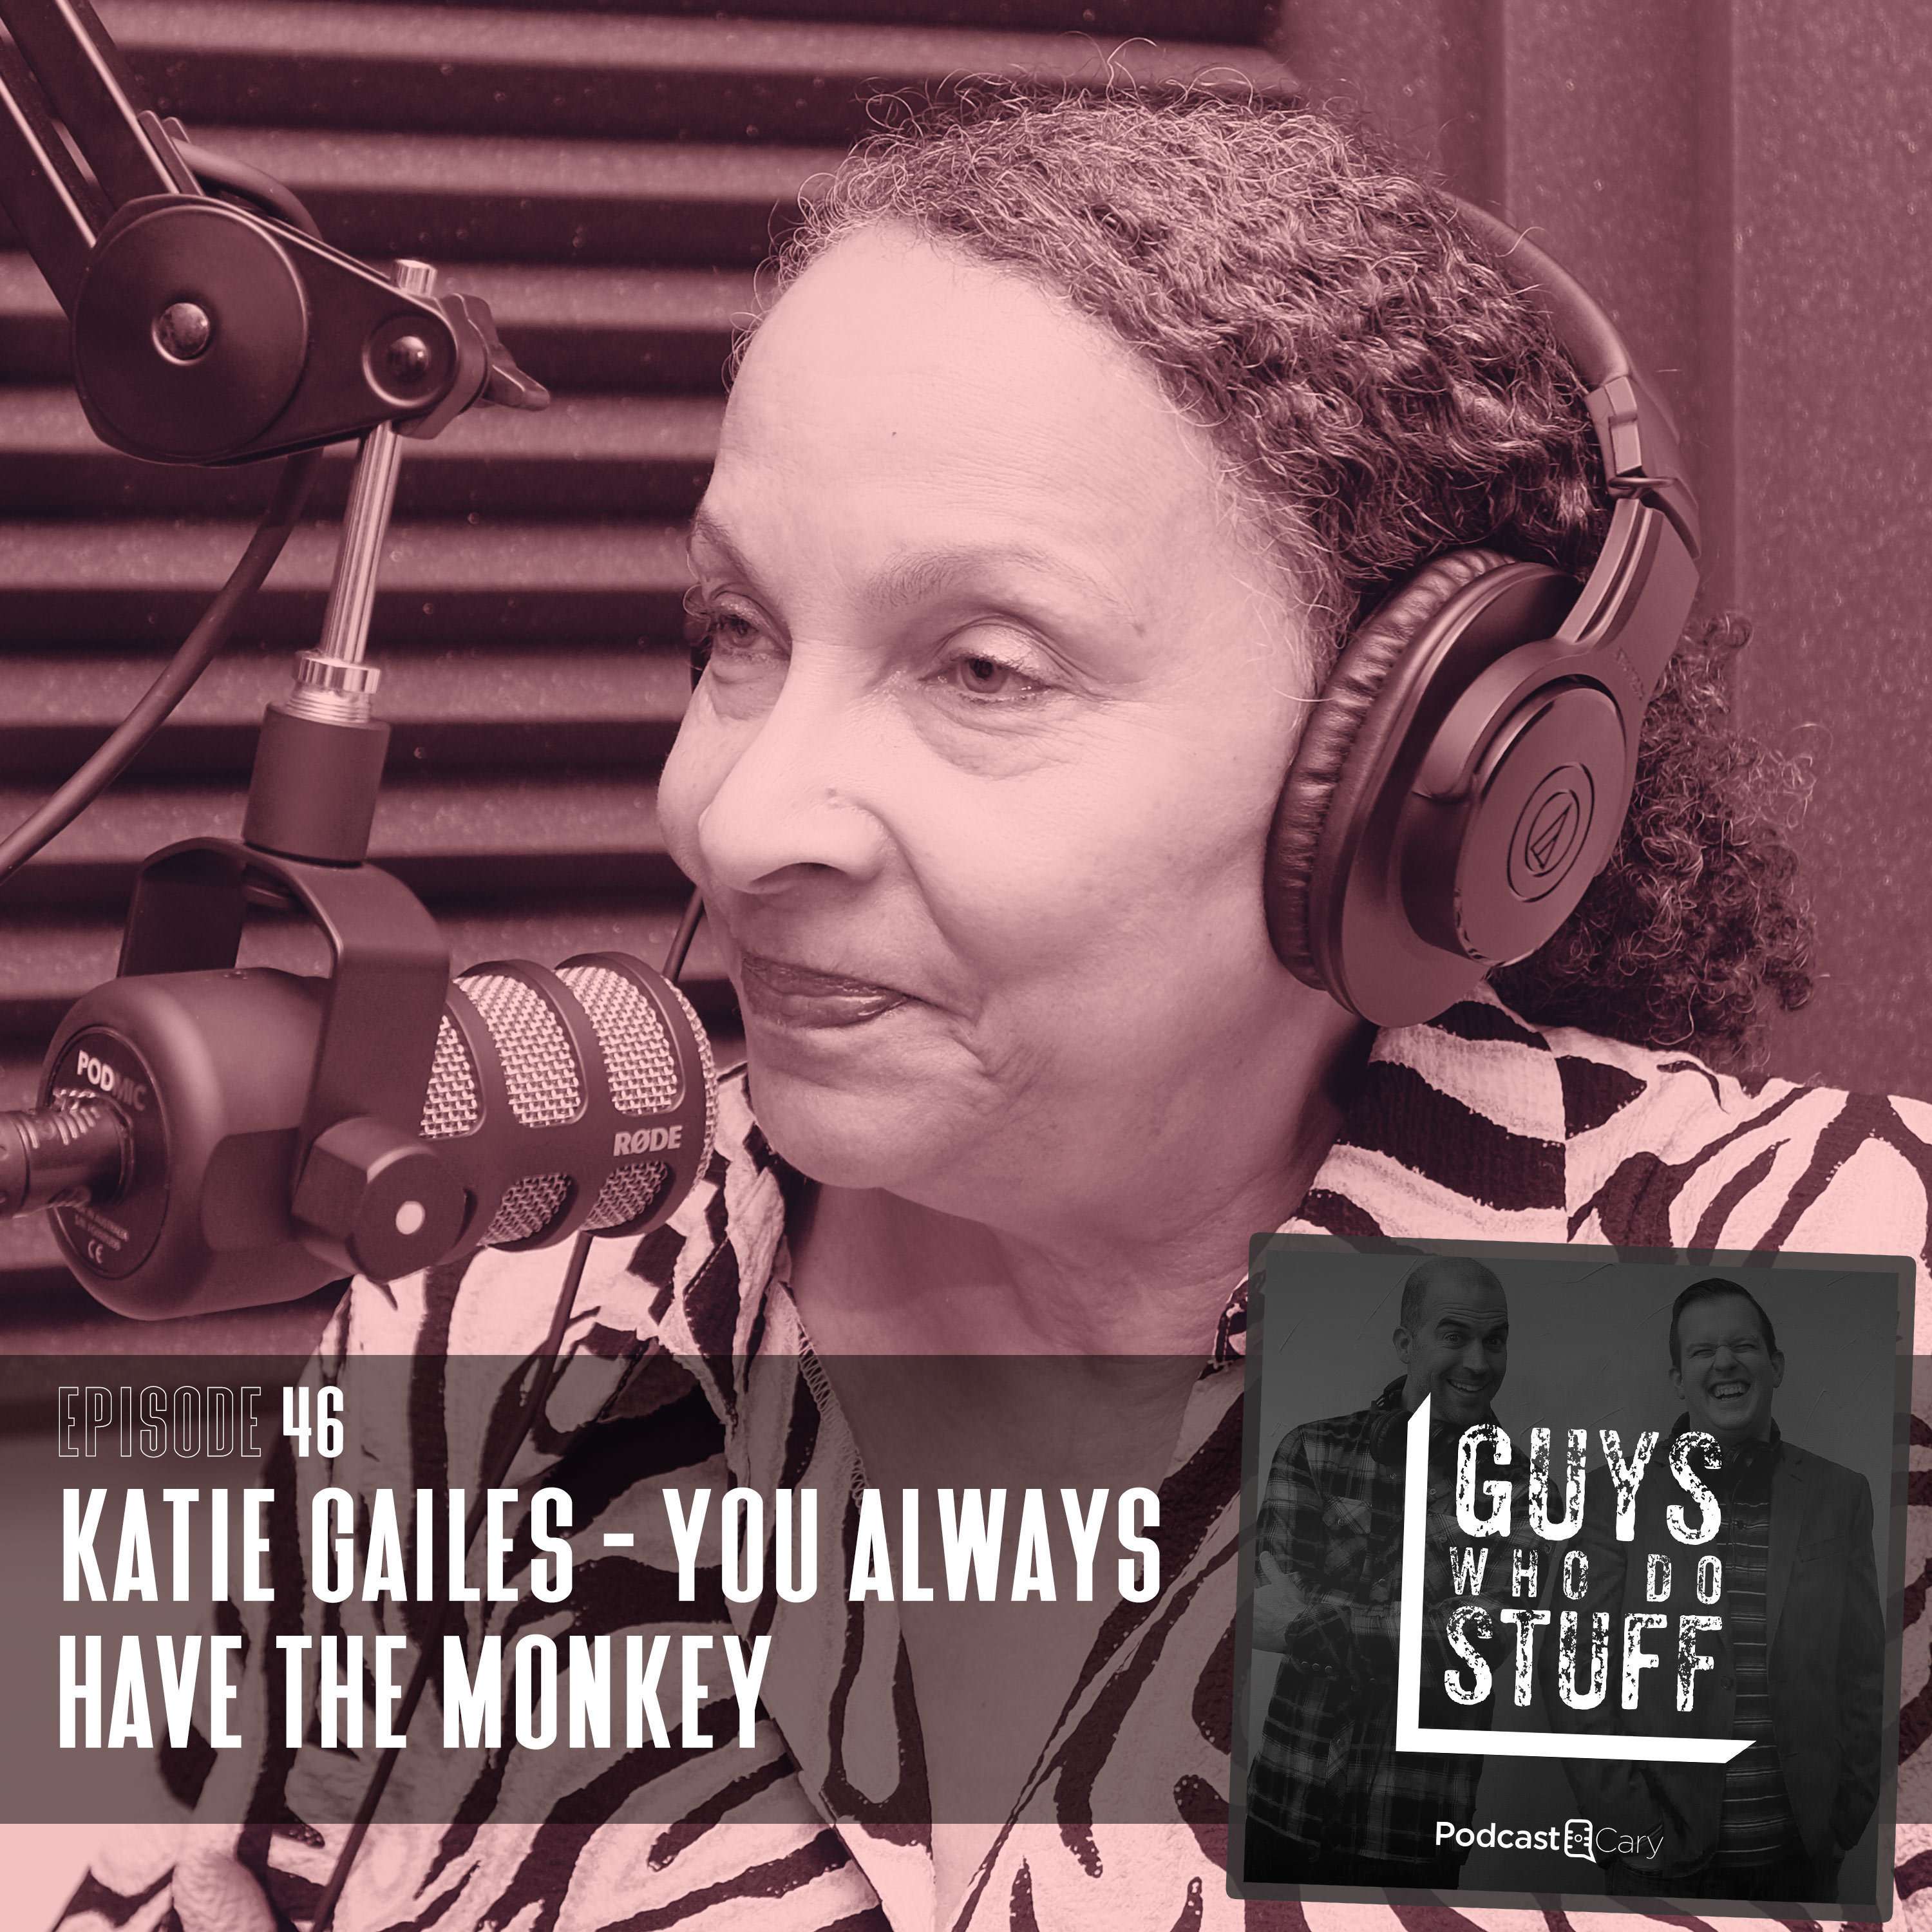 Katie Gailes - You always have the monkey